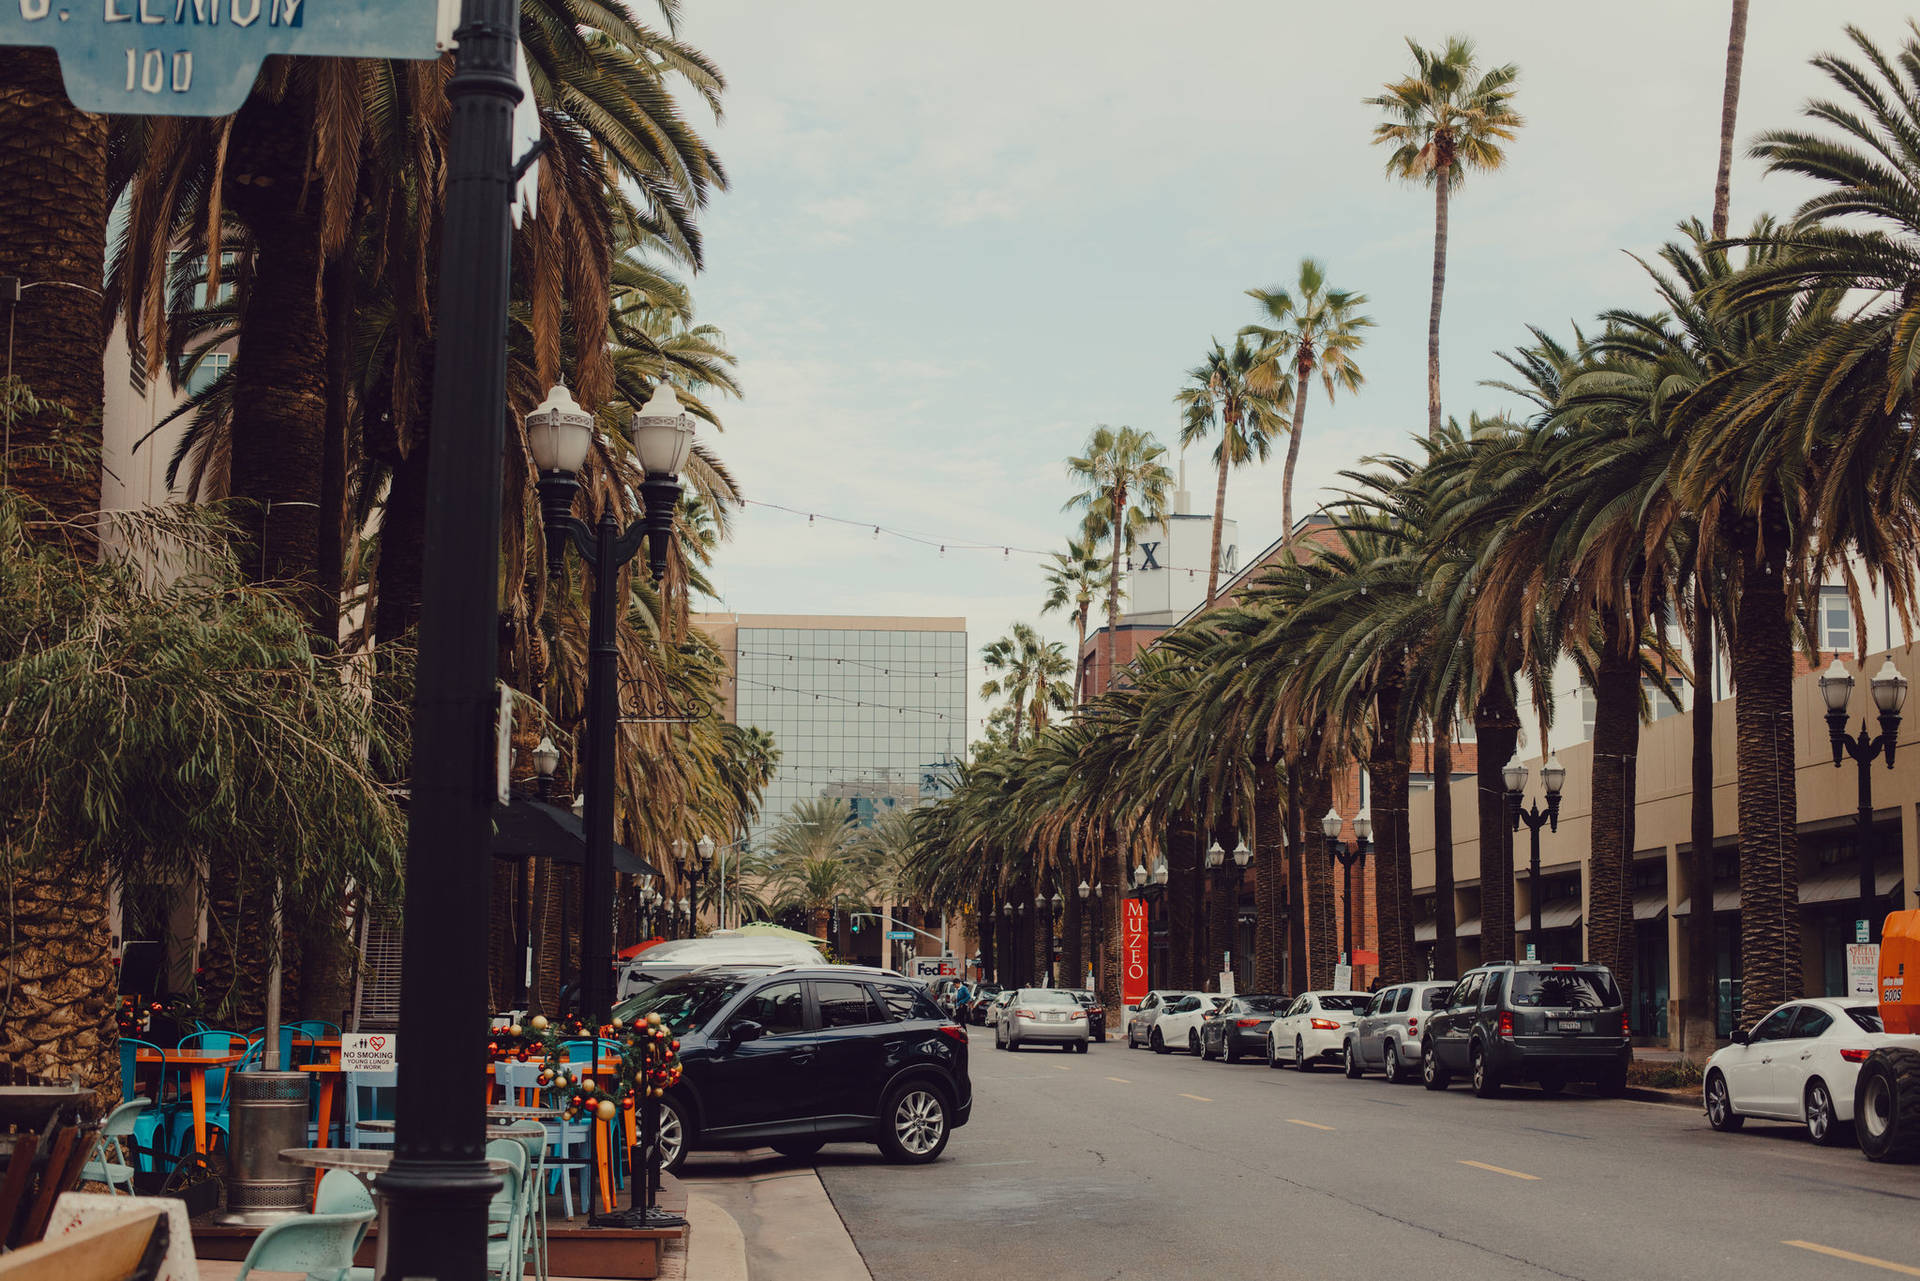 Strolling along the streets of Anaheim Wallpaper